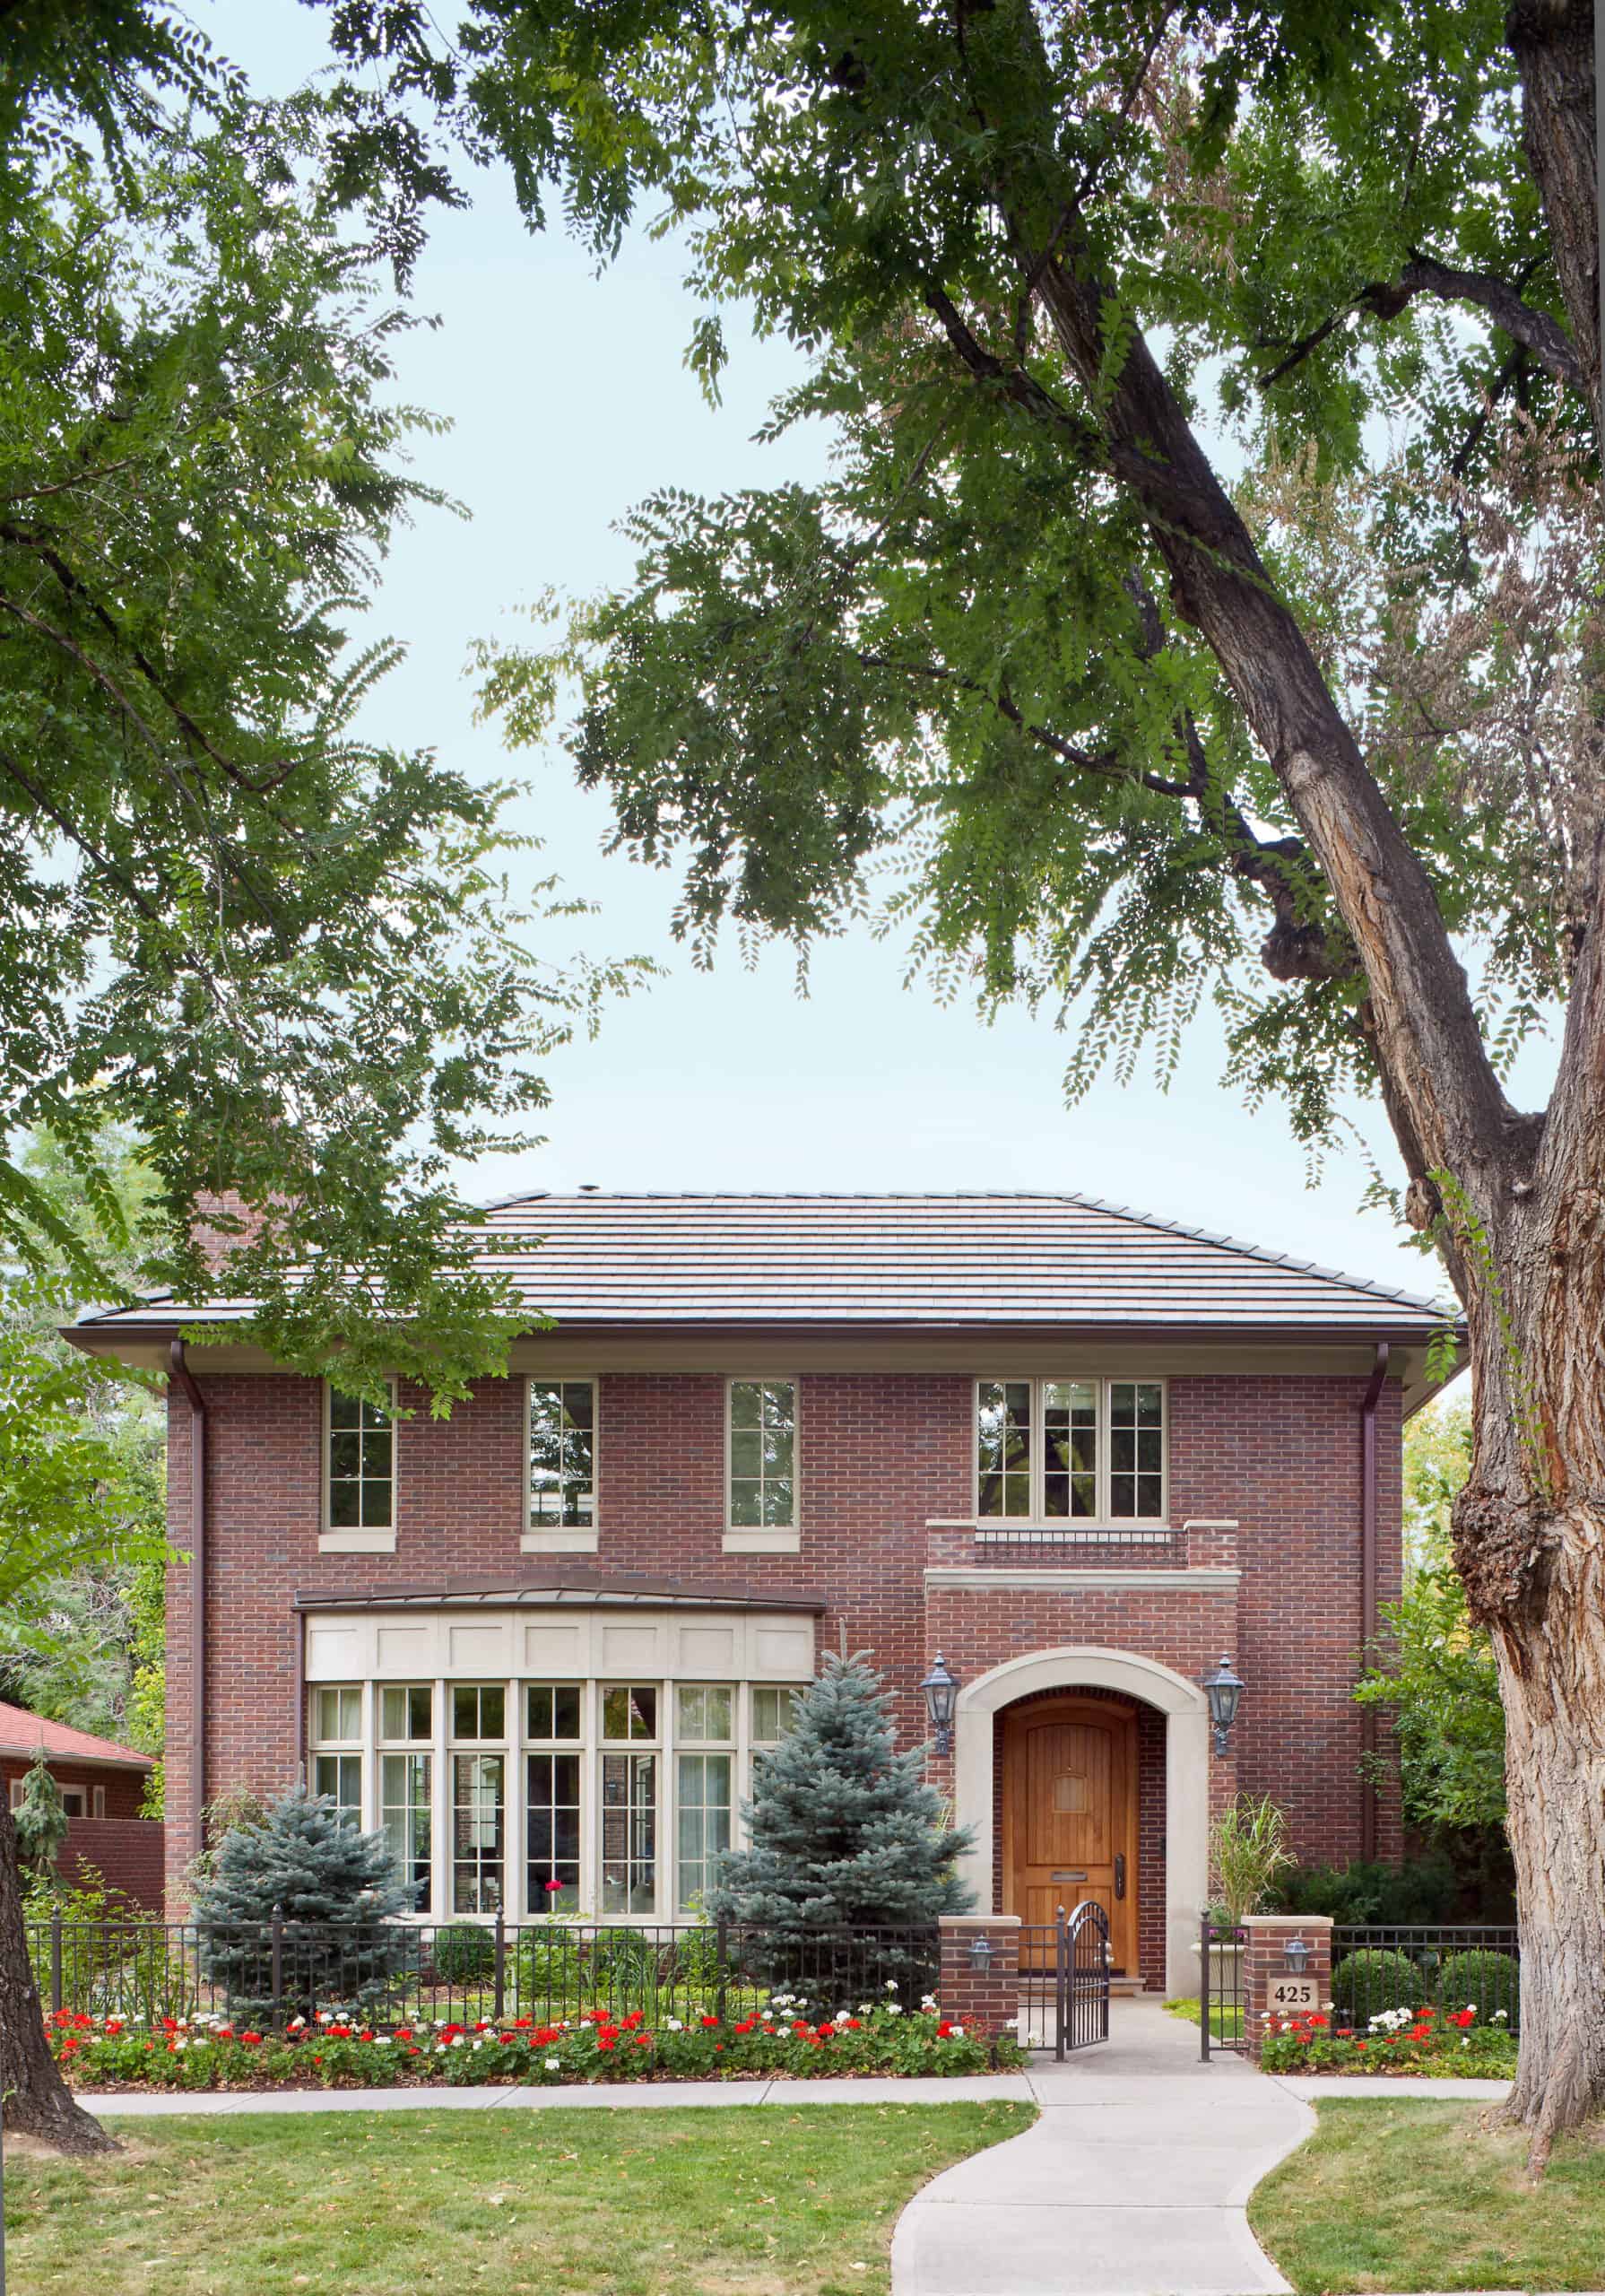 Traditional with a twist two story brick home remodel transformation